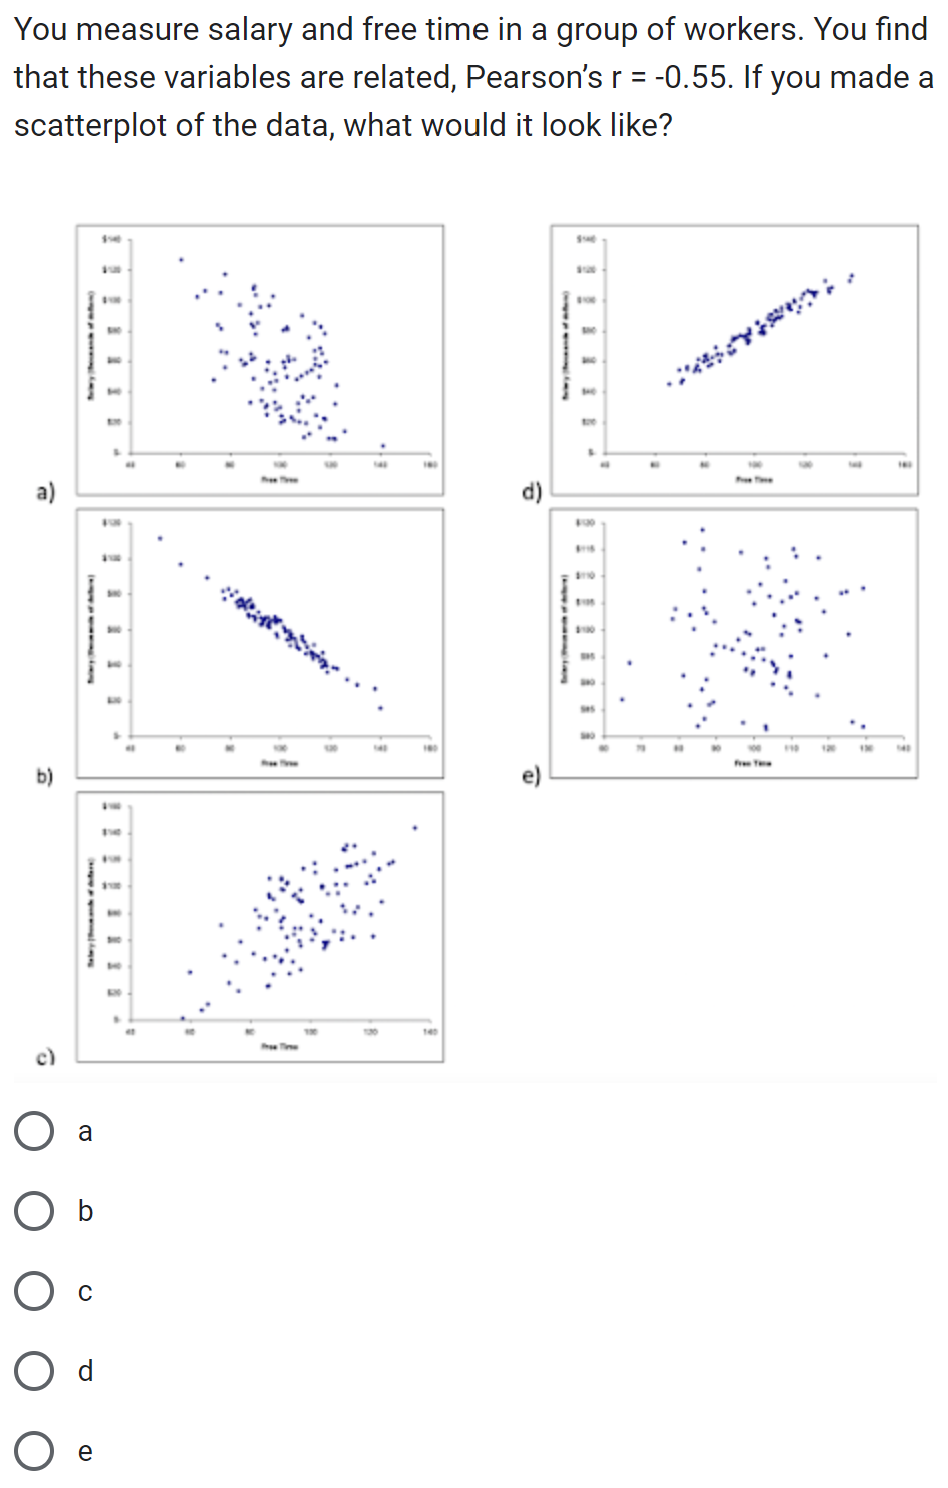 You measure salary and free time in a group of workers. You find
that these variables are related, Pearson's r = -0.55. If you made a
scatterplot of the data, what would it look like?
a)
b)
c)
O a
O b
O C
O d
O e
840
Free Te
5
141
160
140
e)
8:00
$:1:130
8:00
845
540
70
PALLETISIMOS I
Free Taxe
120
130
180
141